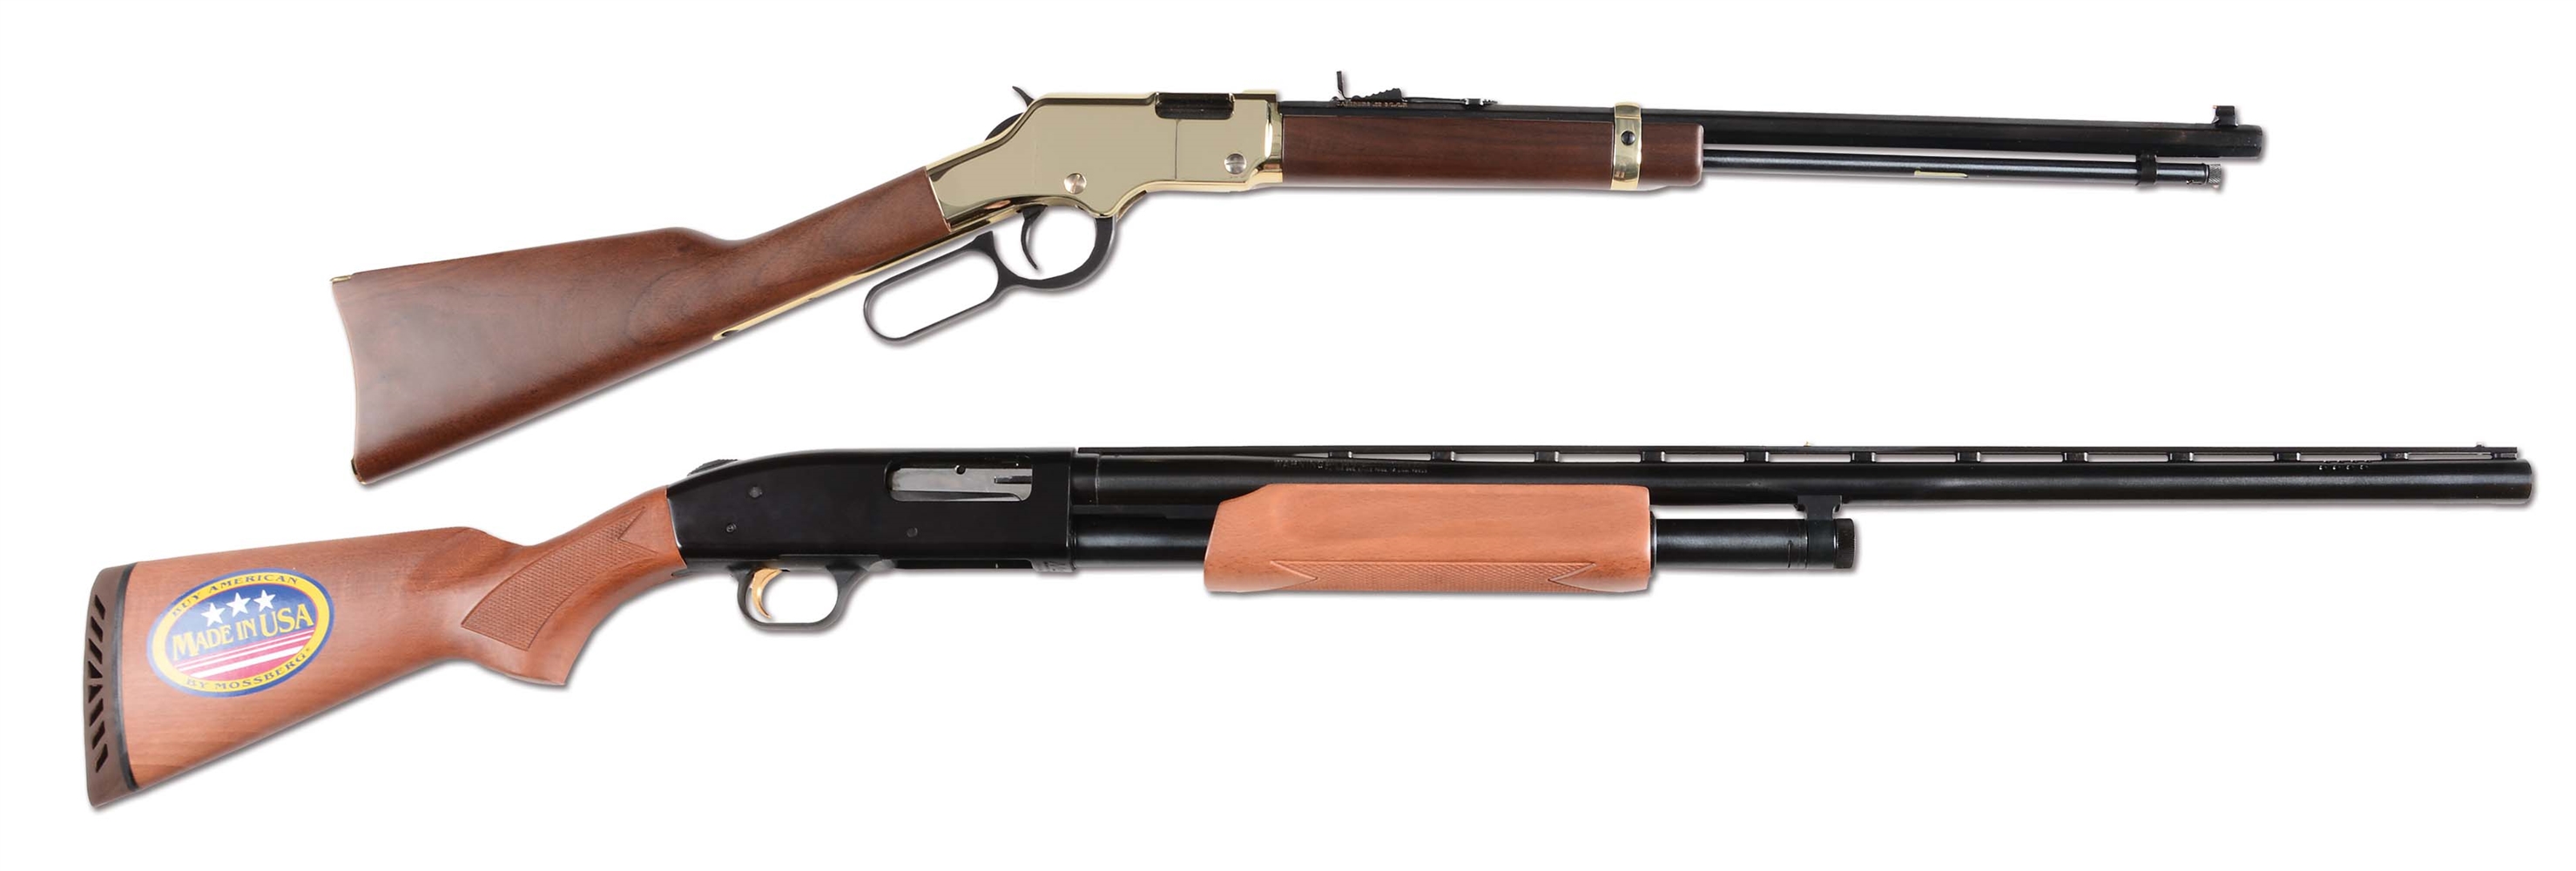 (M) LOT OF 2: ONE NIB HENRY GOLDEN BOY LEVER ACTION RIFLE AND ONE NIB MOSSBERG 500 AMERICAN FIELD